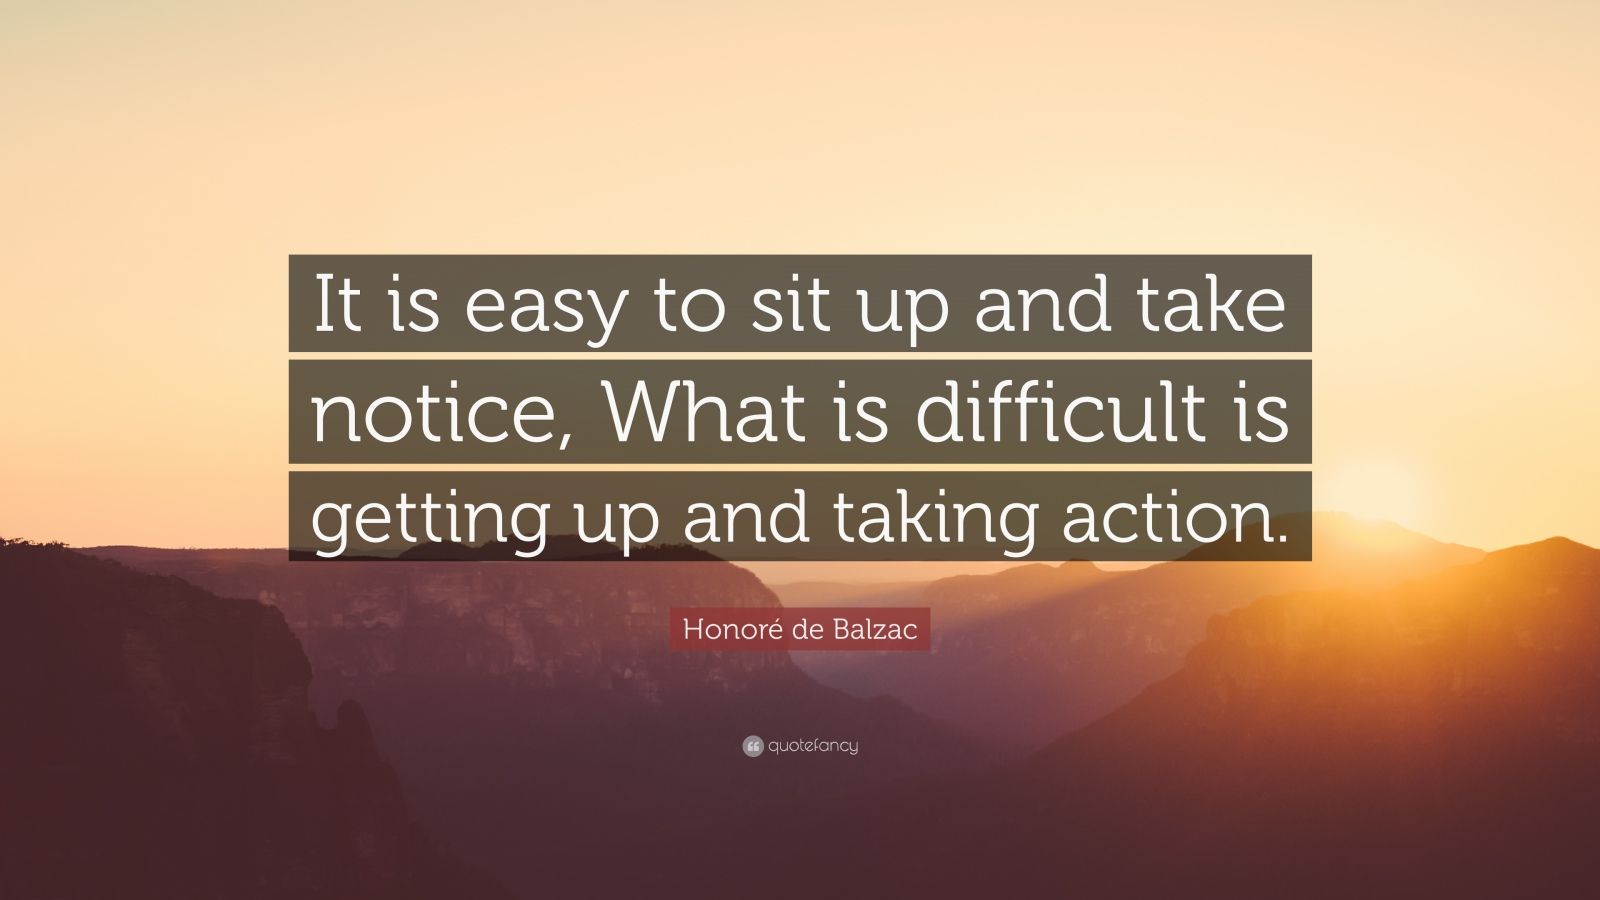 Honoré de Balzac Quote: “It is easy to sit up and take notice, What is difficult is ...1600 x 900